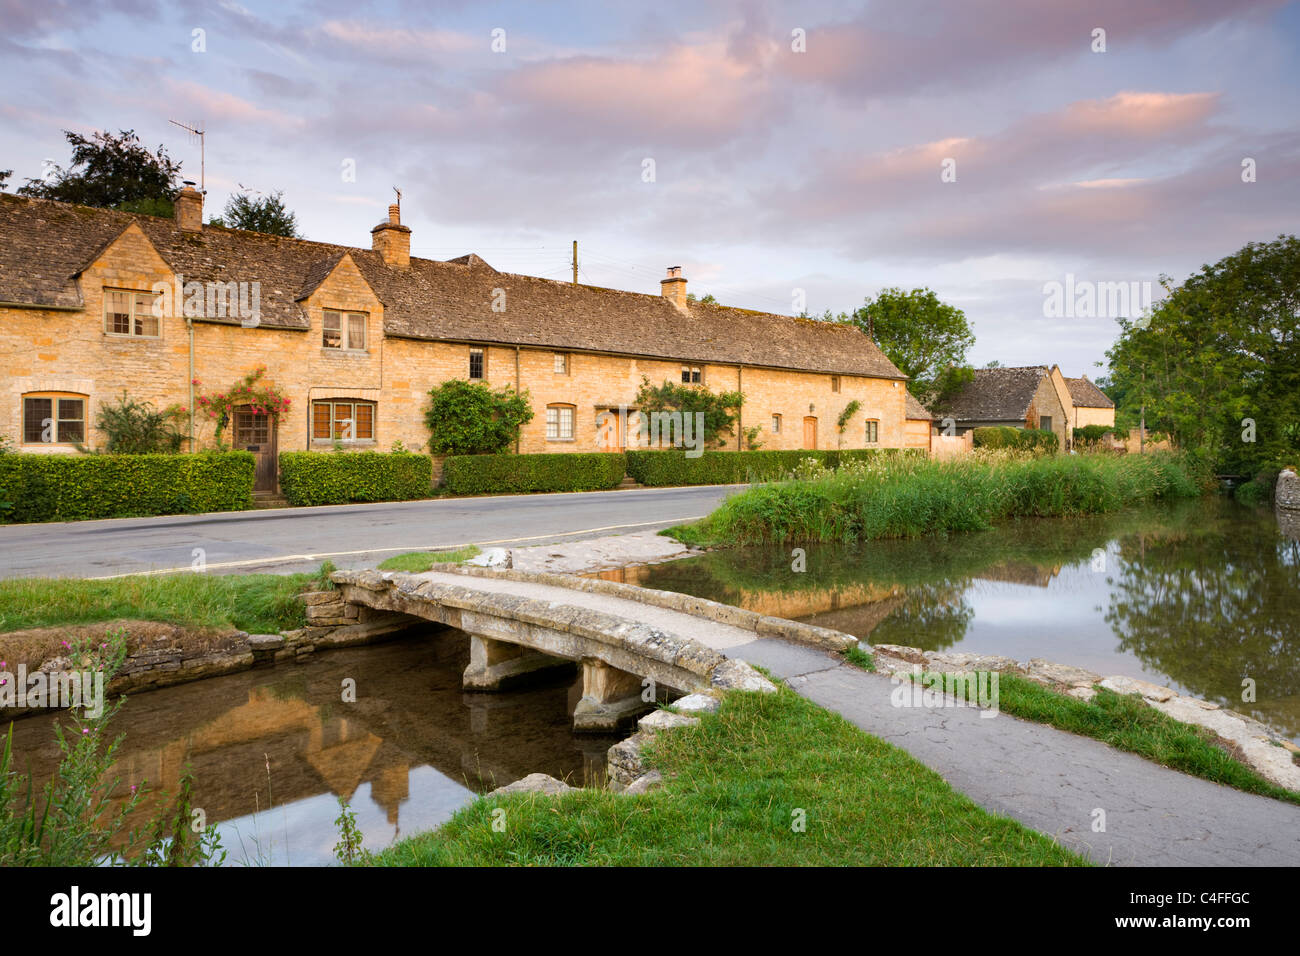 Cottages and stone footbridge in the Cotswolds village of Lower Slaughter, Gloucestershire, England. Stock Photo